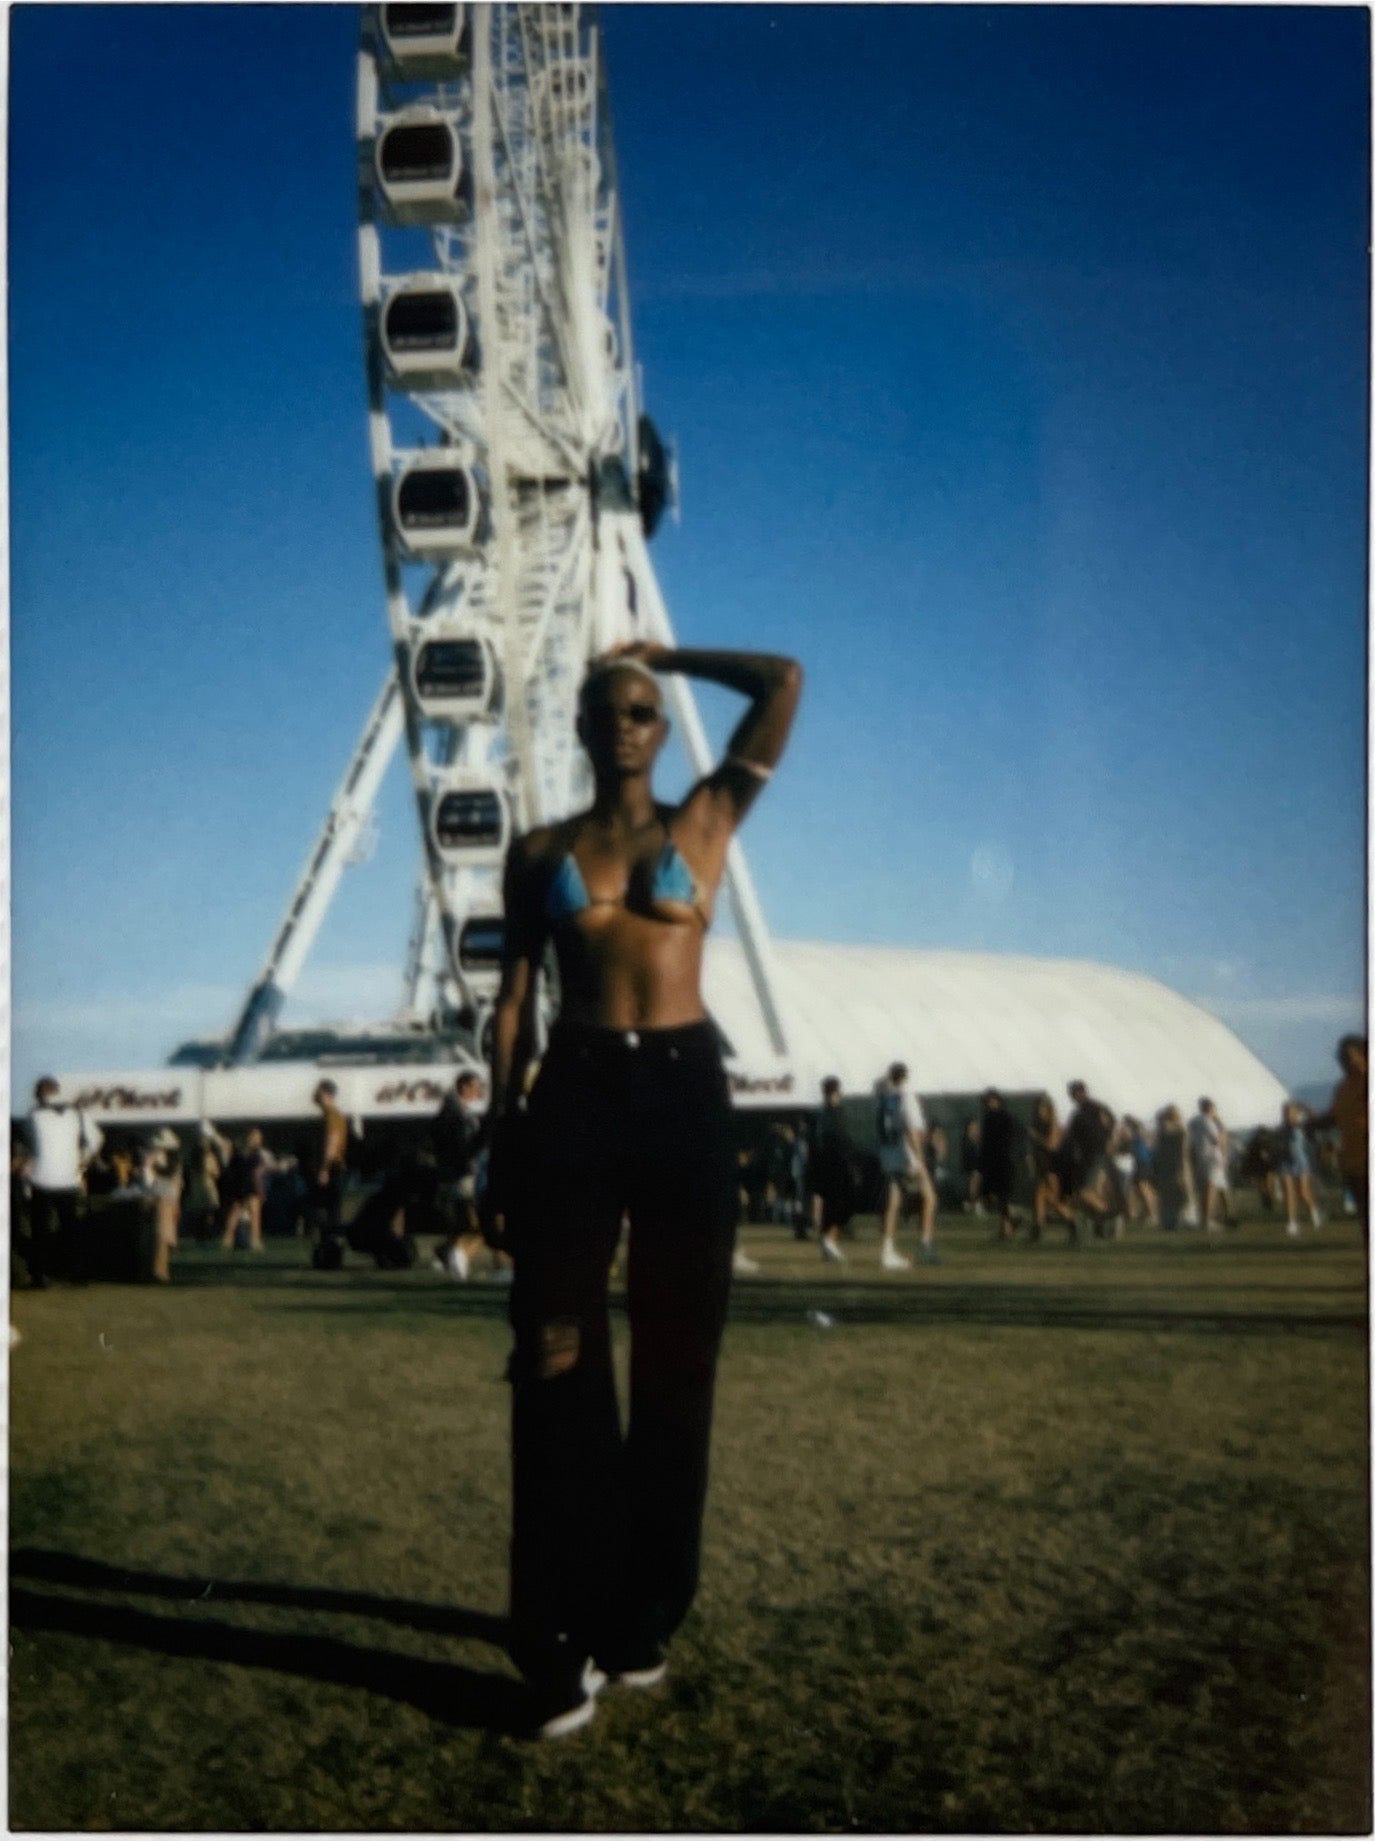 Polaroid of young person at a festival.